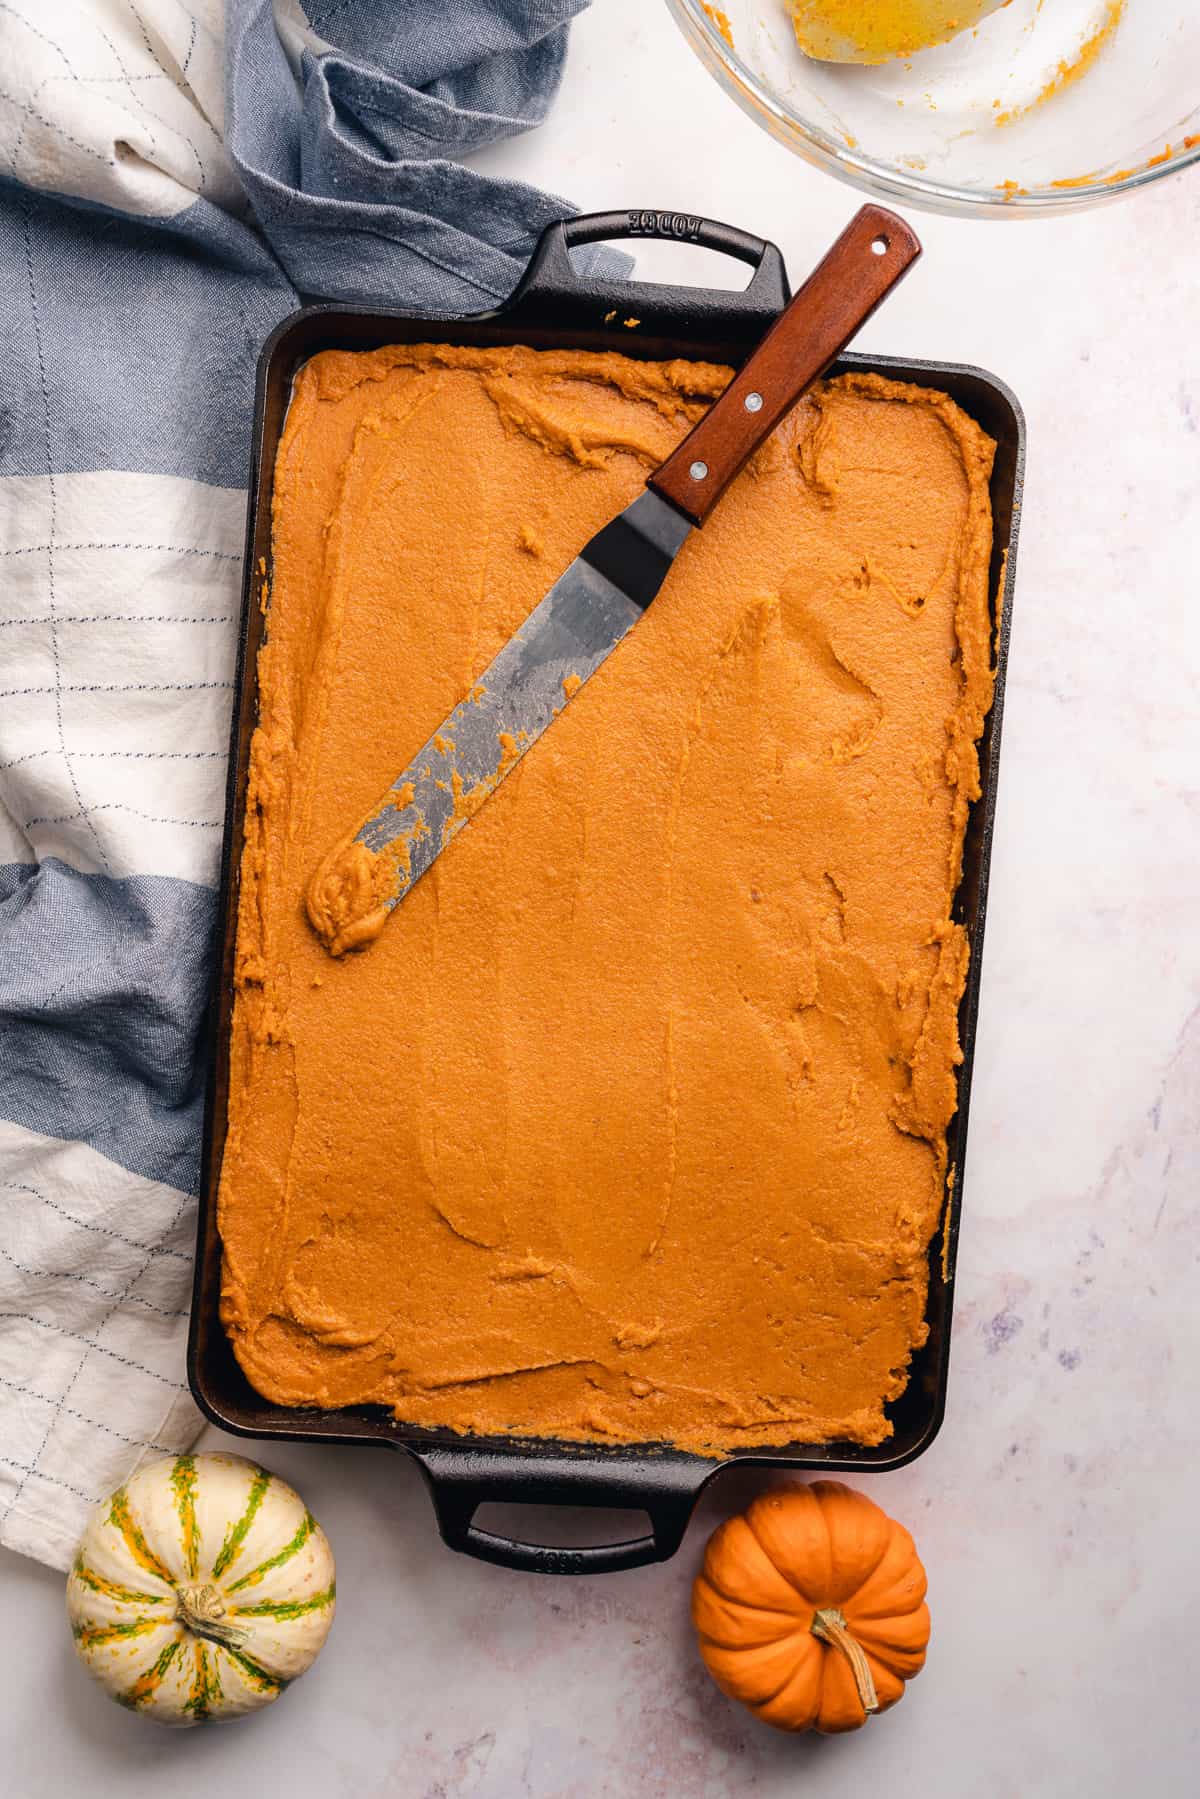 pumpkin bars spread into a cast iron baking pan with a angled spatula overtop